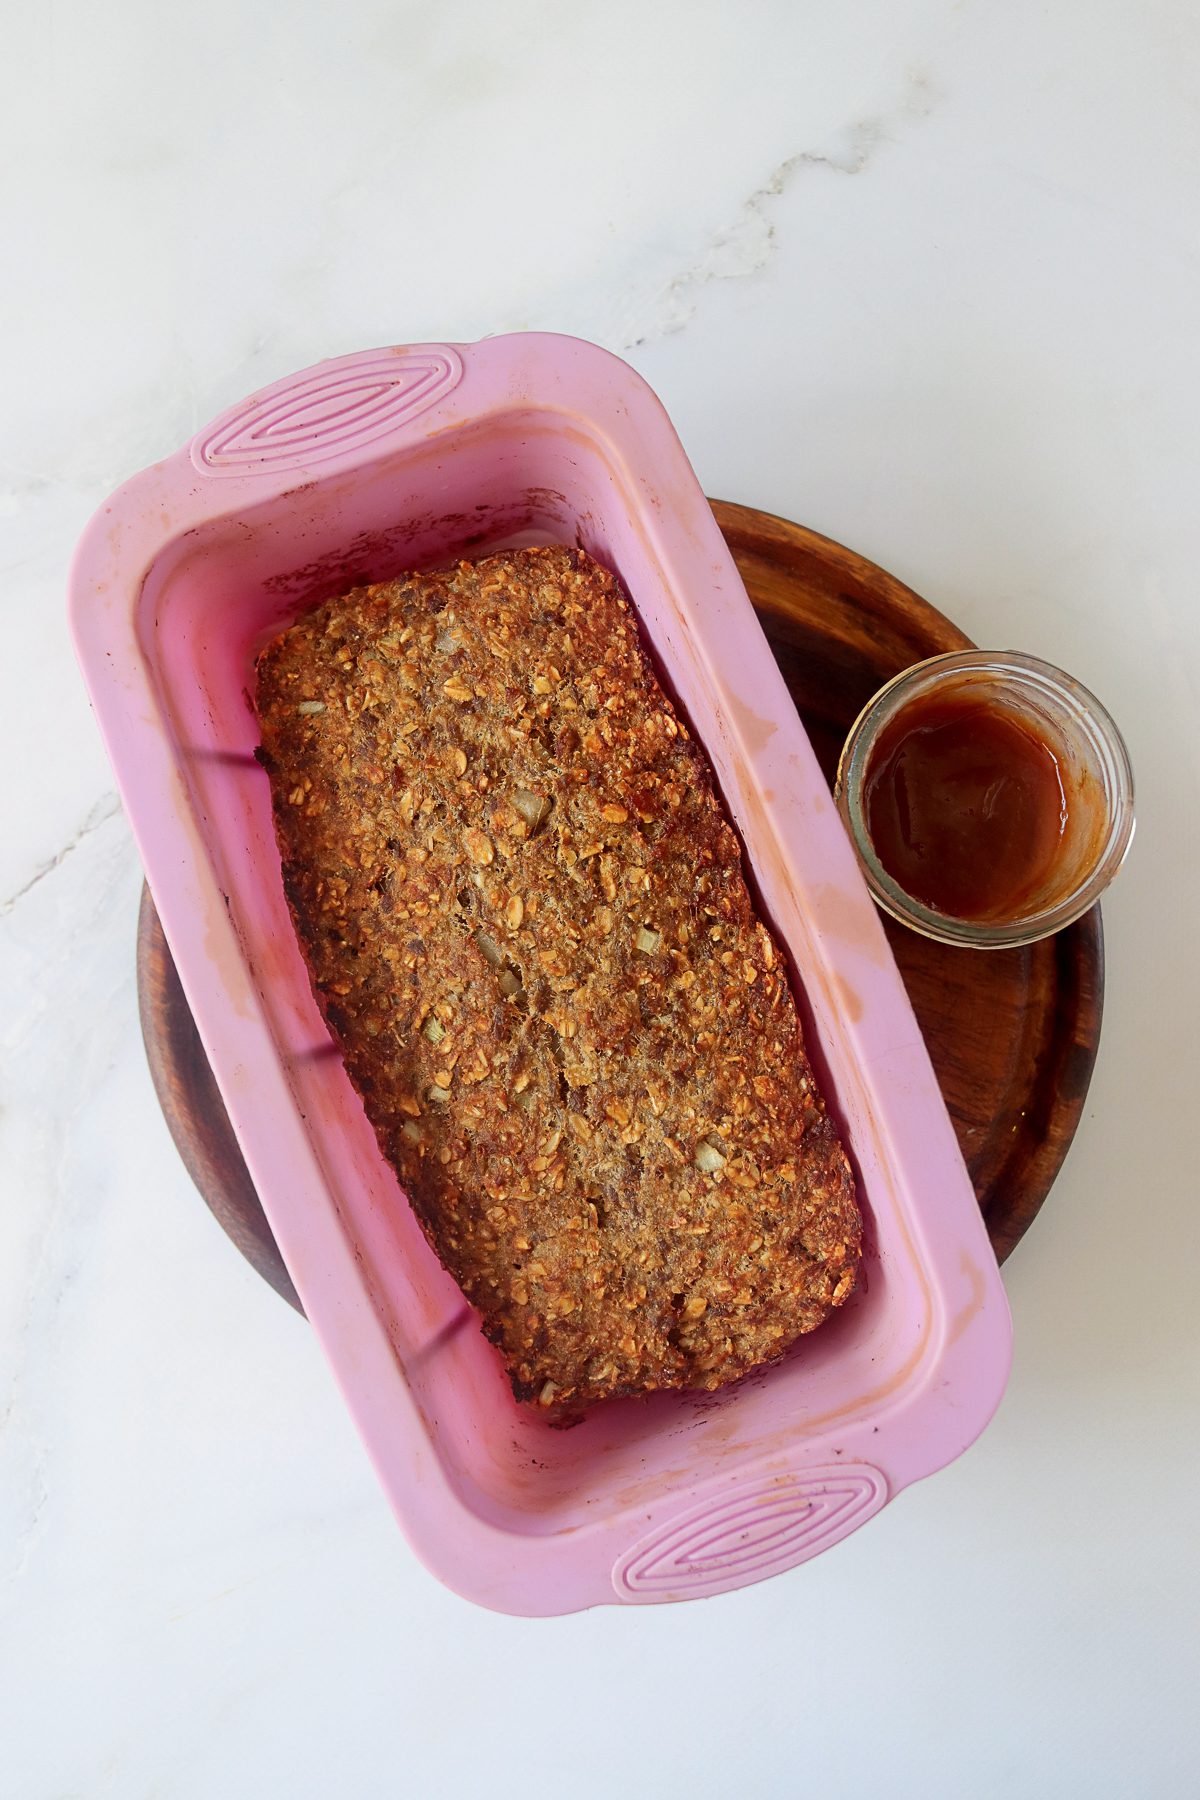 Meatloaf made with Applesauce and Oatmeal